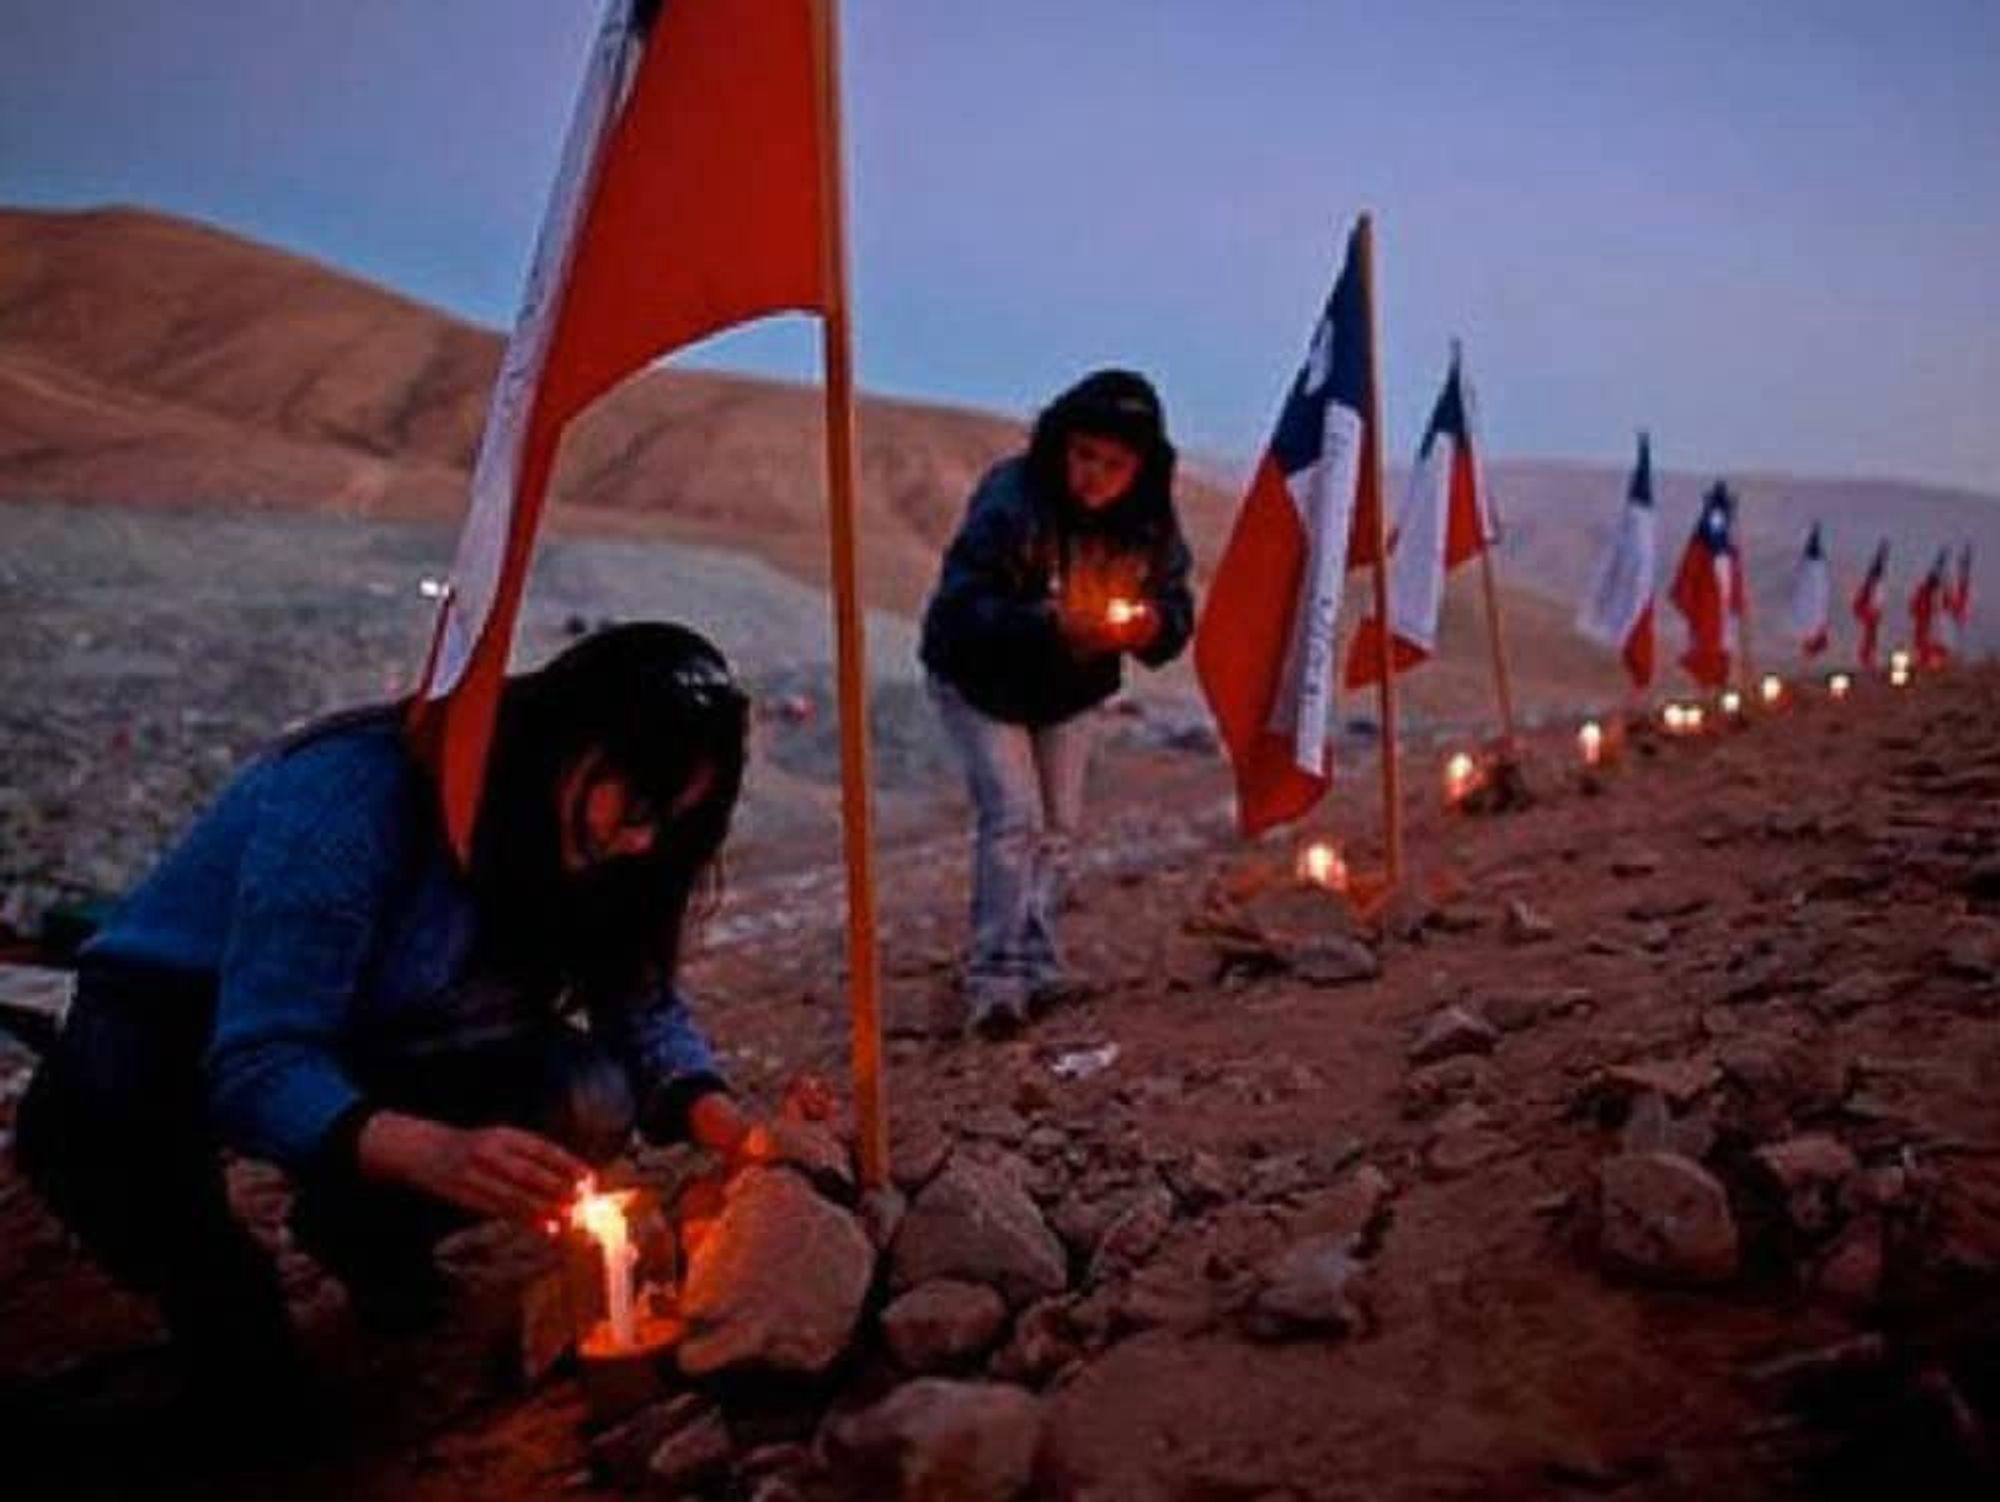 News_Chile_miners_trapped_candles_flags